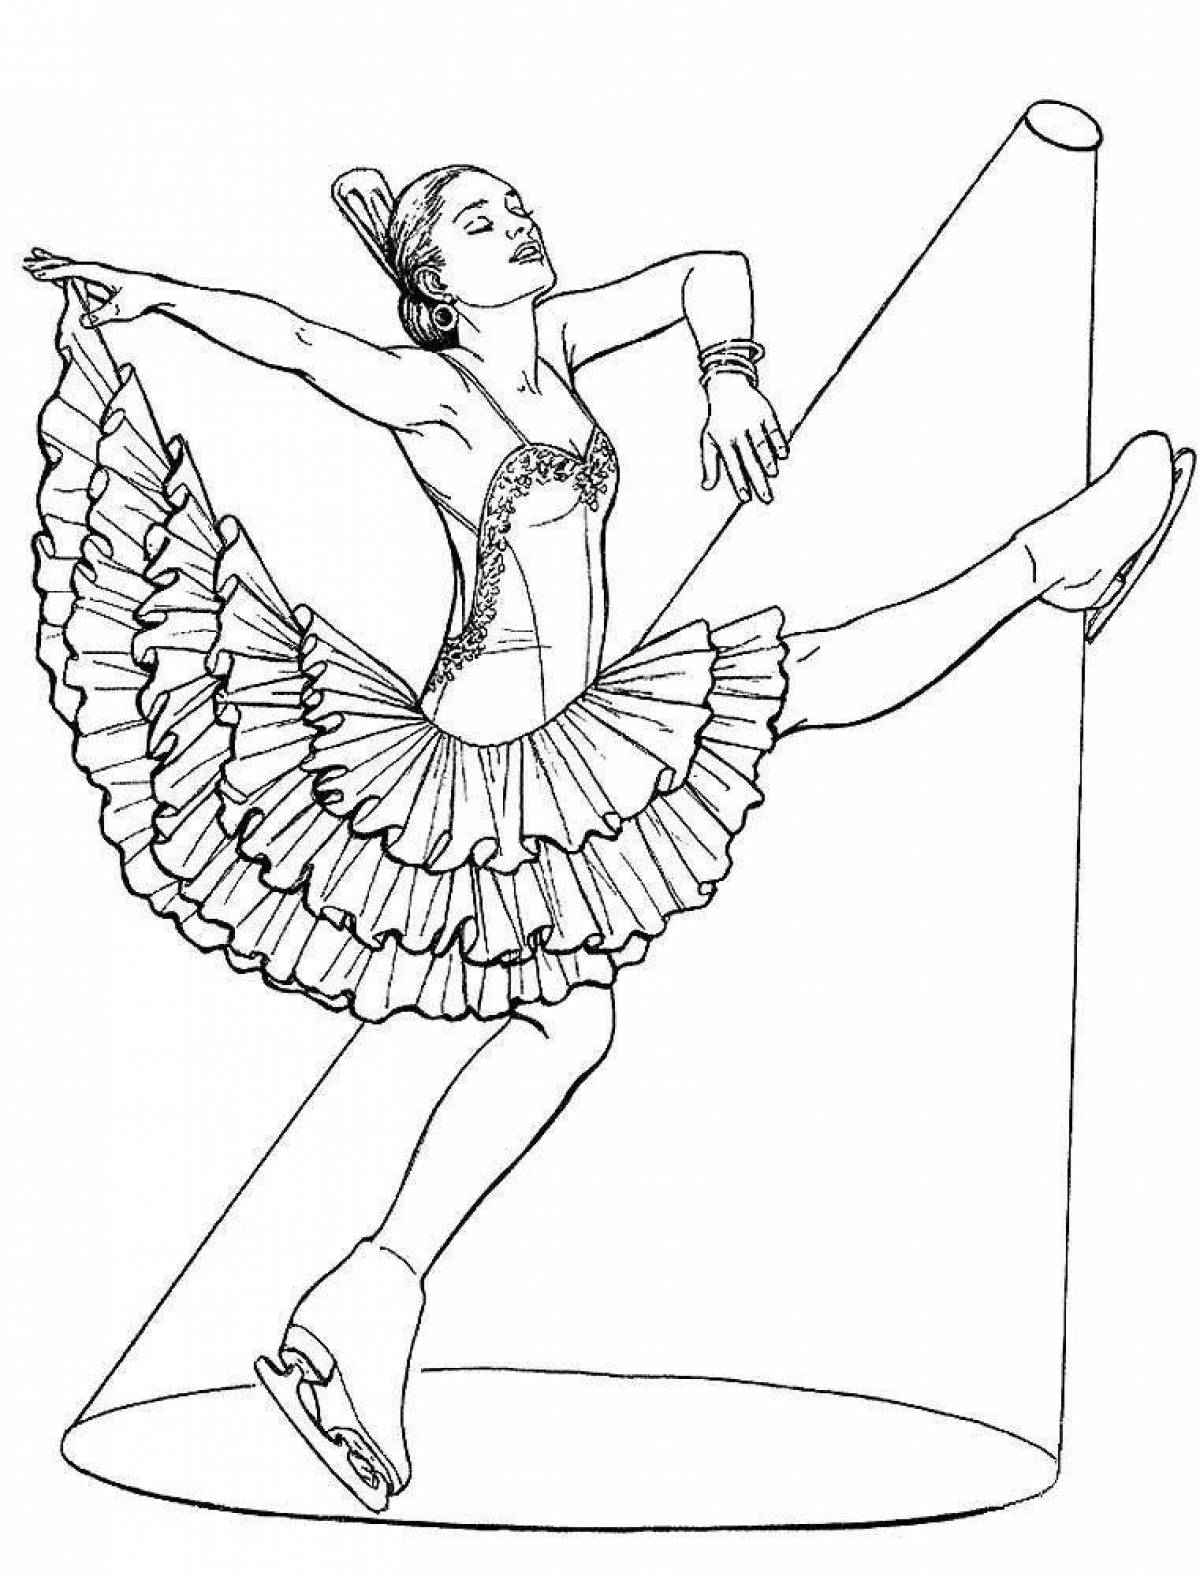 Charming figure skater coloring book for kids